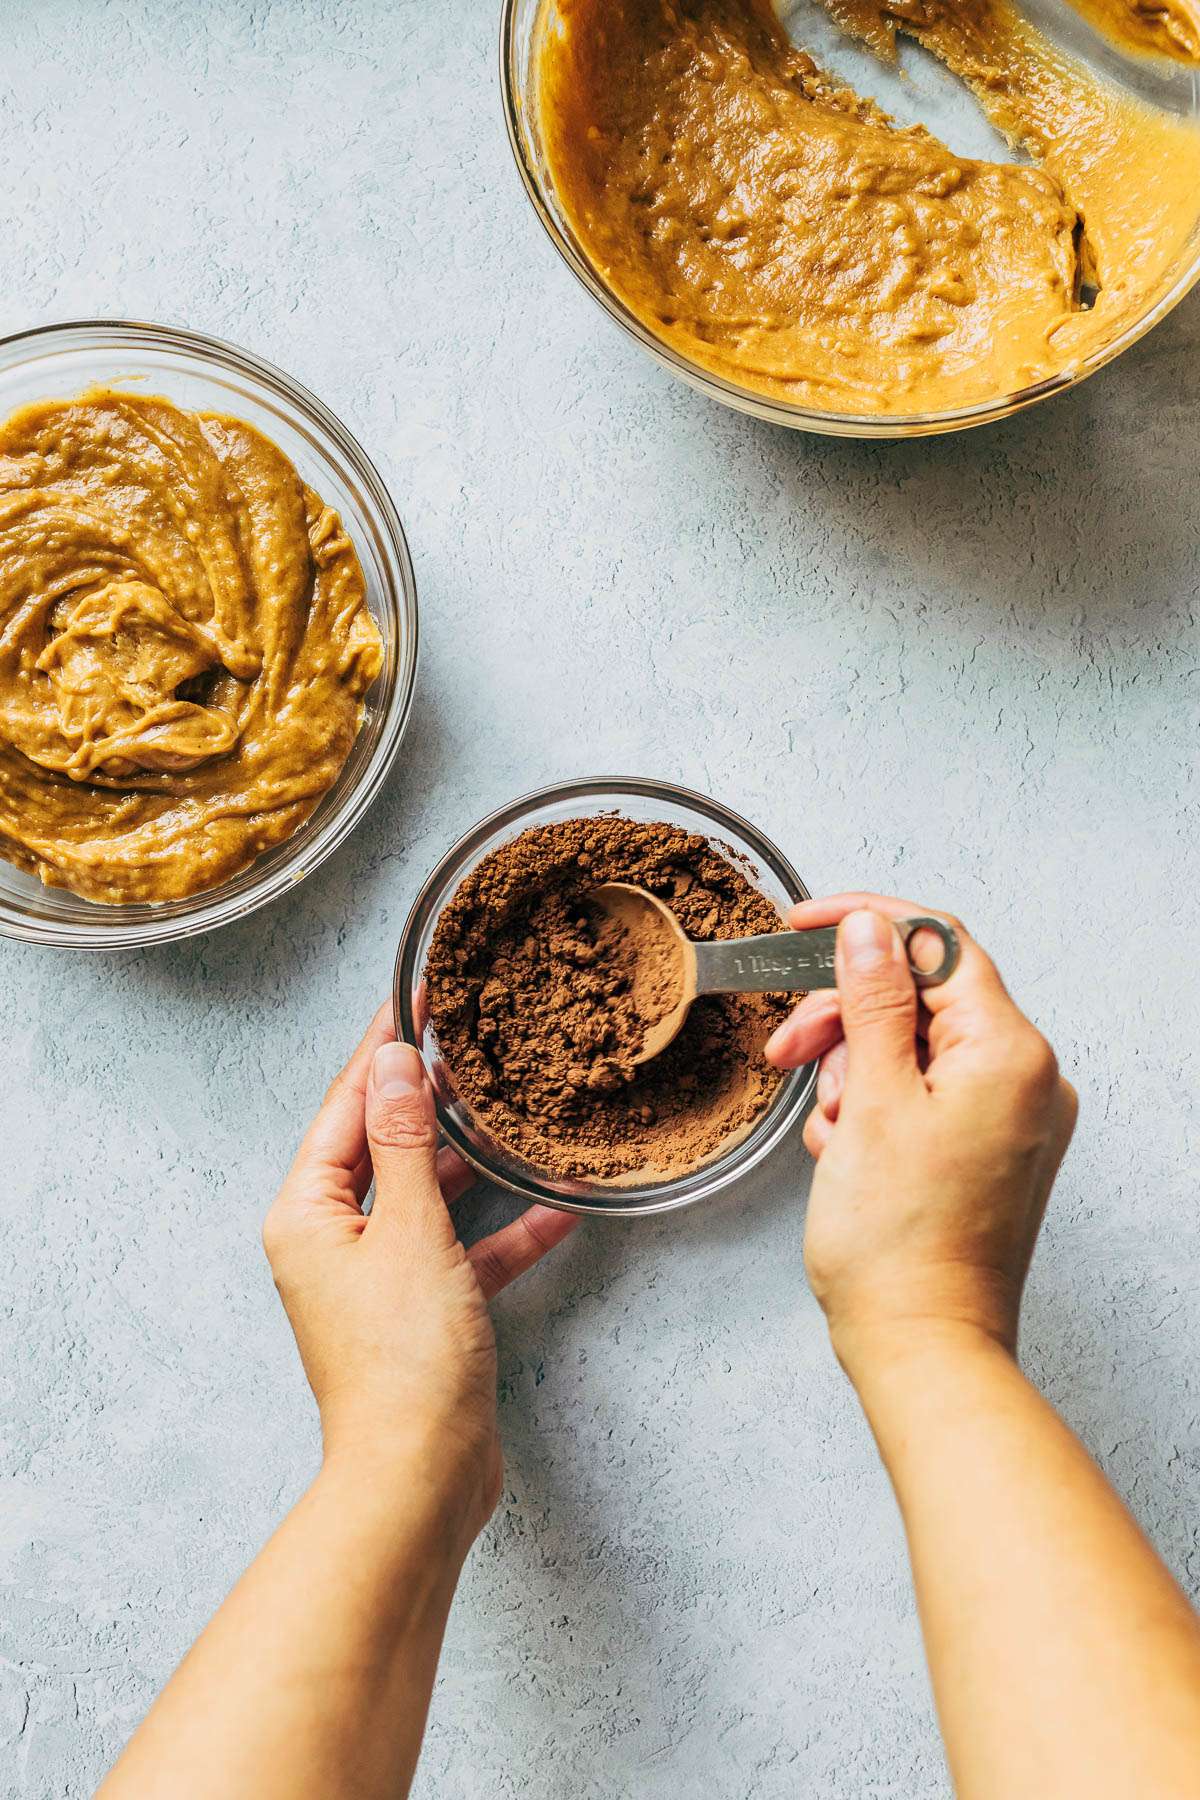 Hands scooping cocoa powder from a small bowl with a tablespoon measuring spoon.